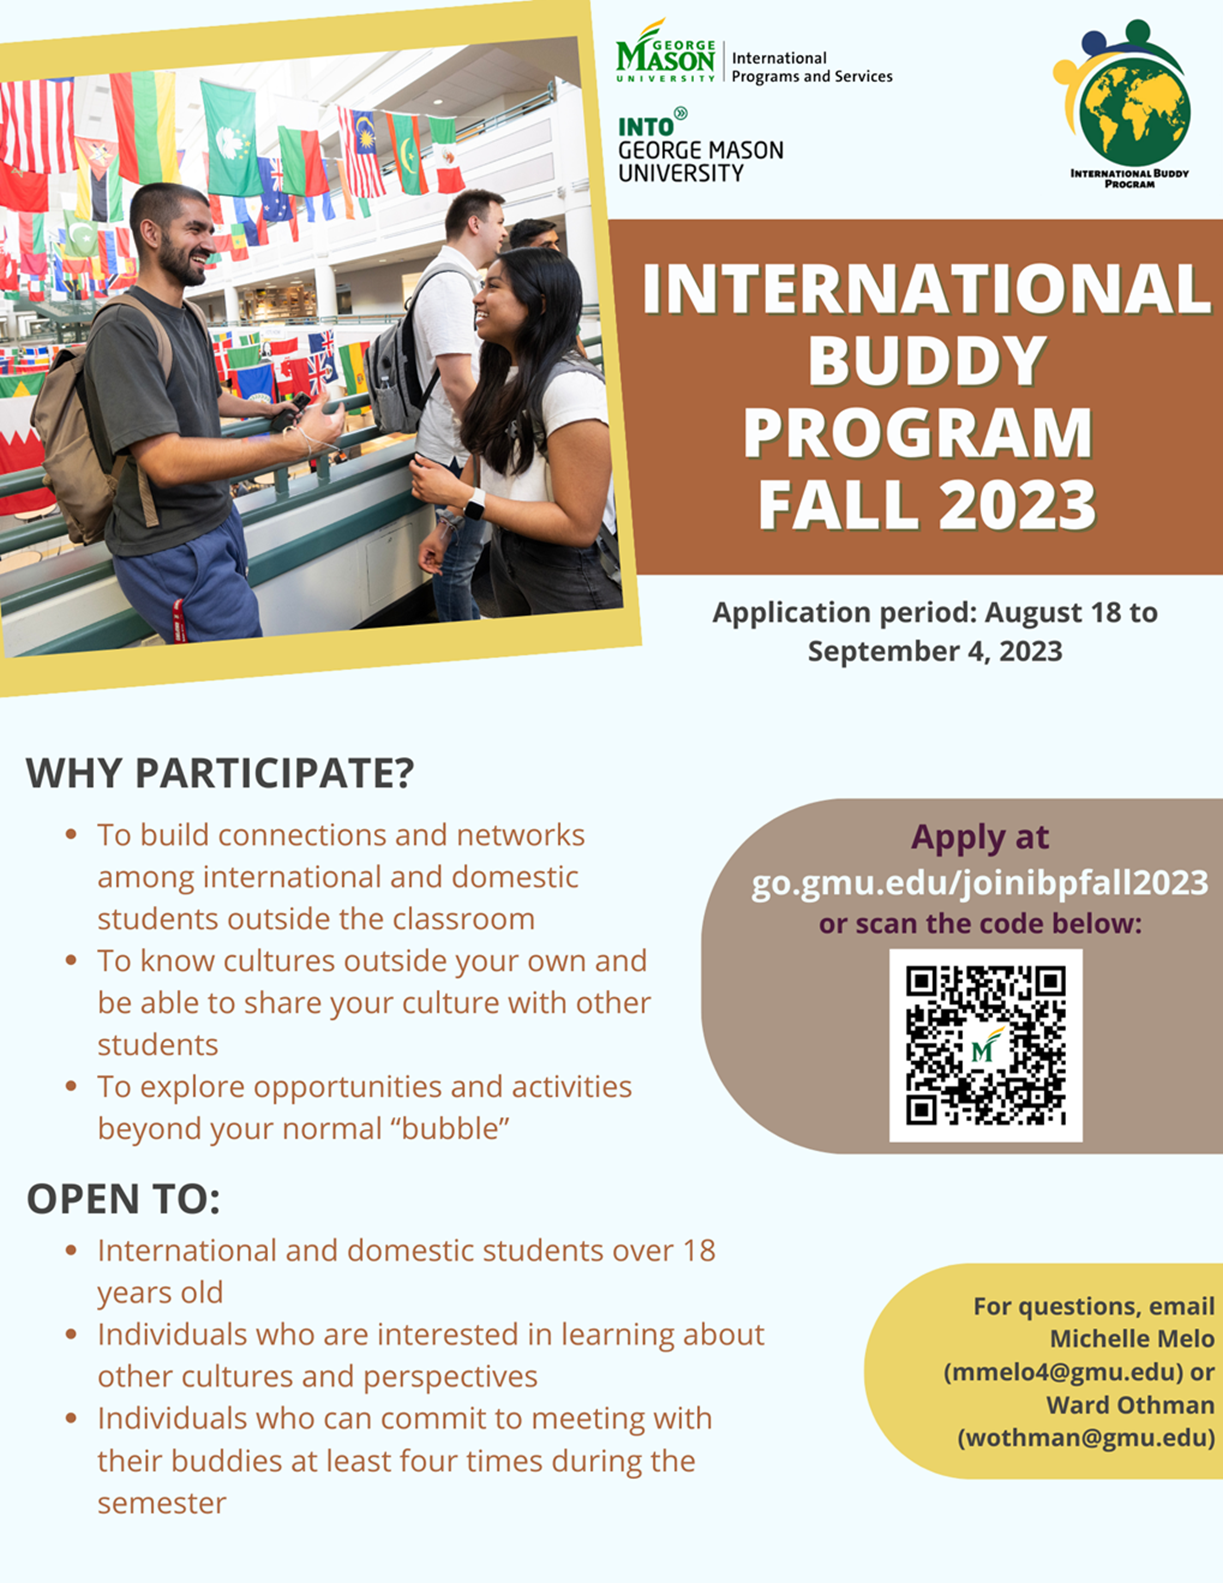 Fall 2023 International Buddy Application Due September 4, 2023 - Sponsored by Office of International Programs and Services